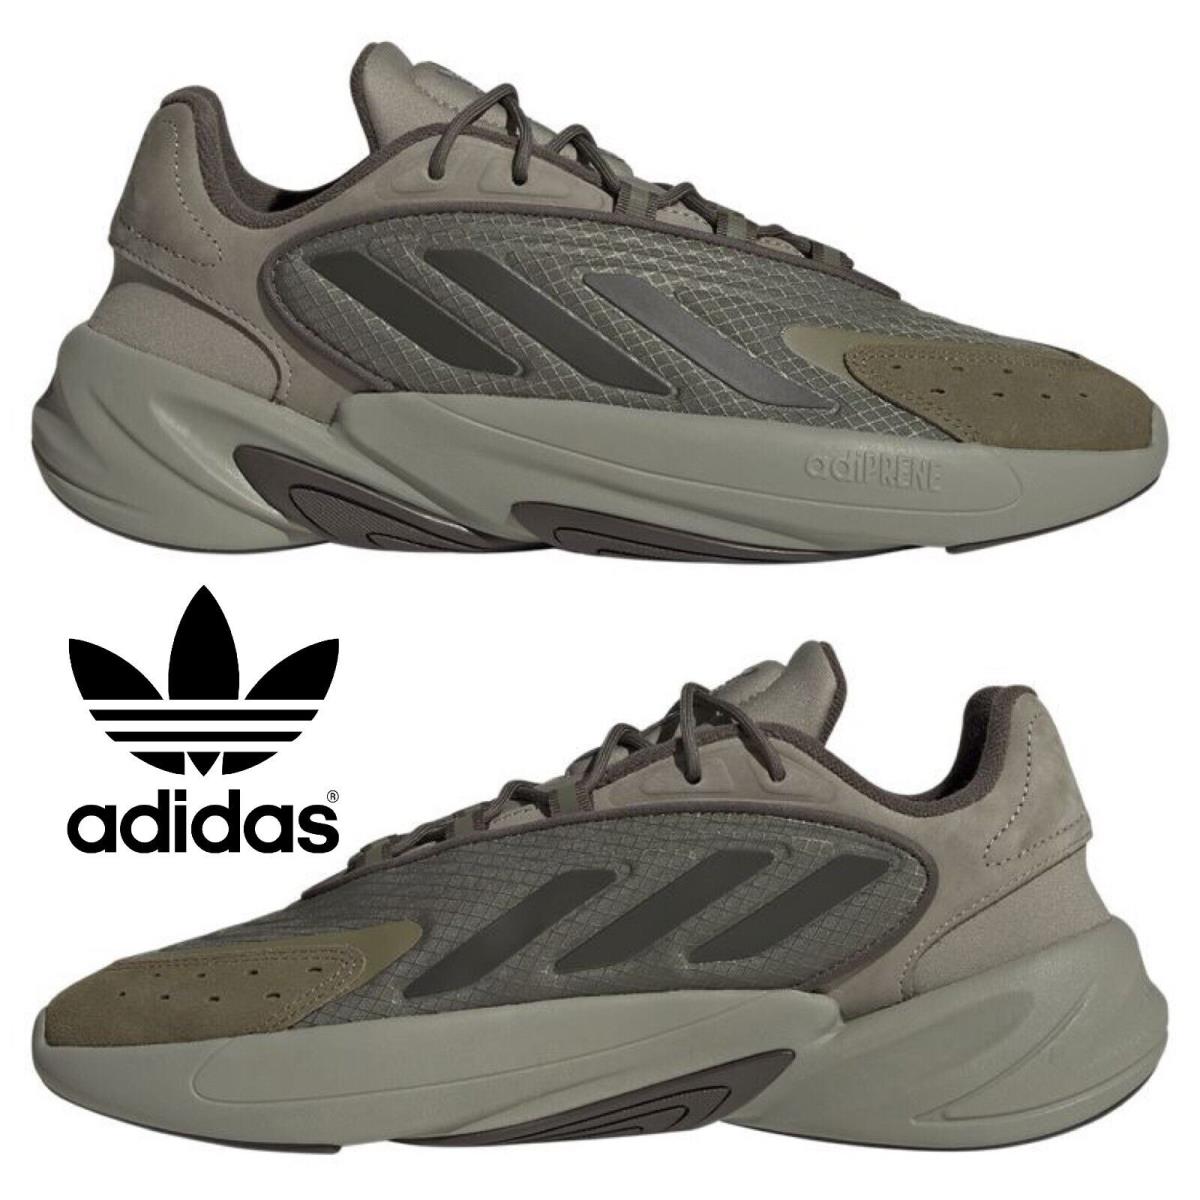 Adidas Originals Ozelia Men`s Sneakers Comfort Sport Running Shoes Bold Chunky - Green, Manufacturer: Olive/Grey/Olive